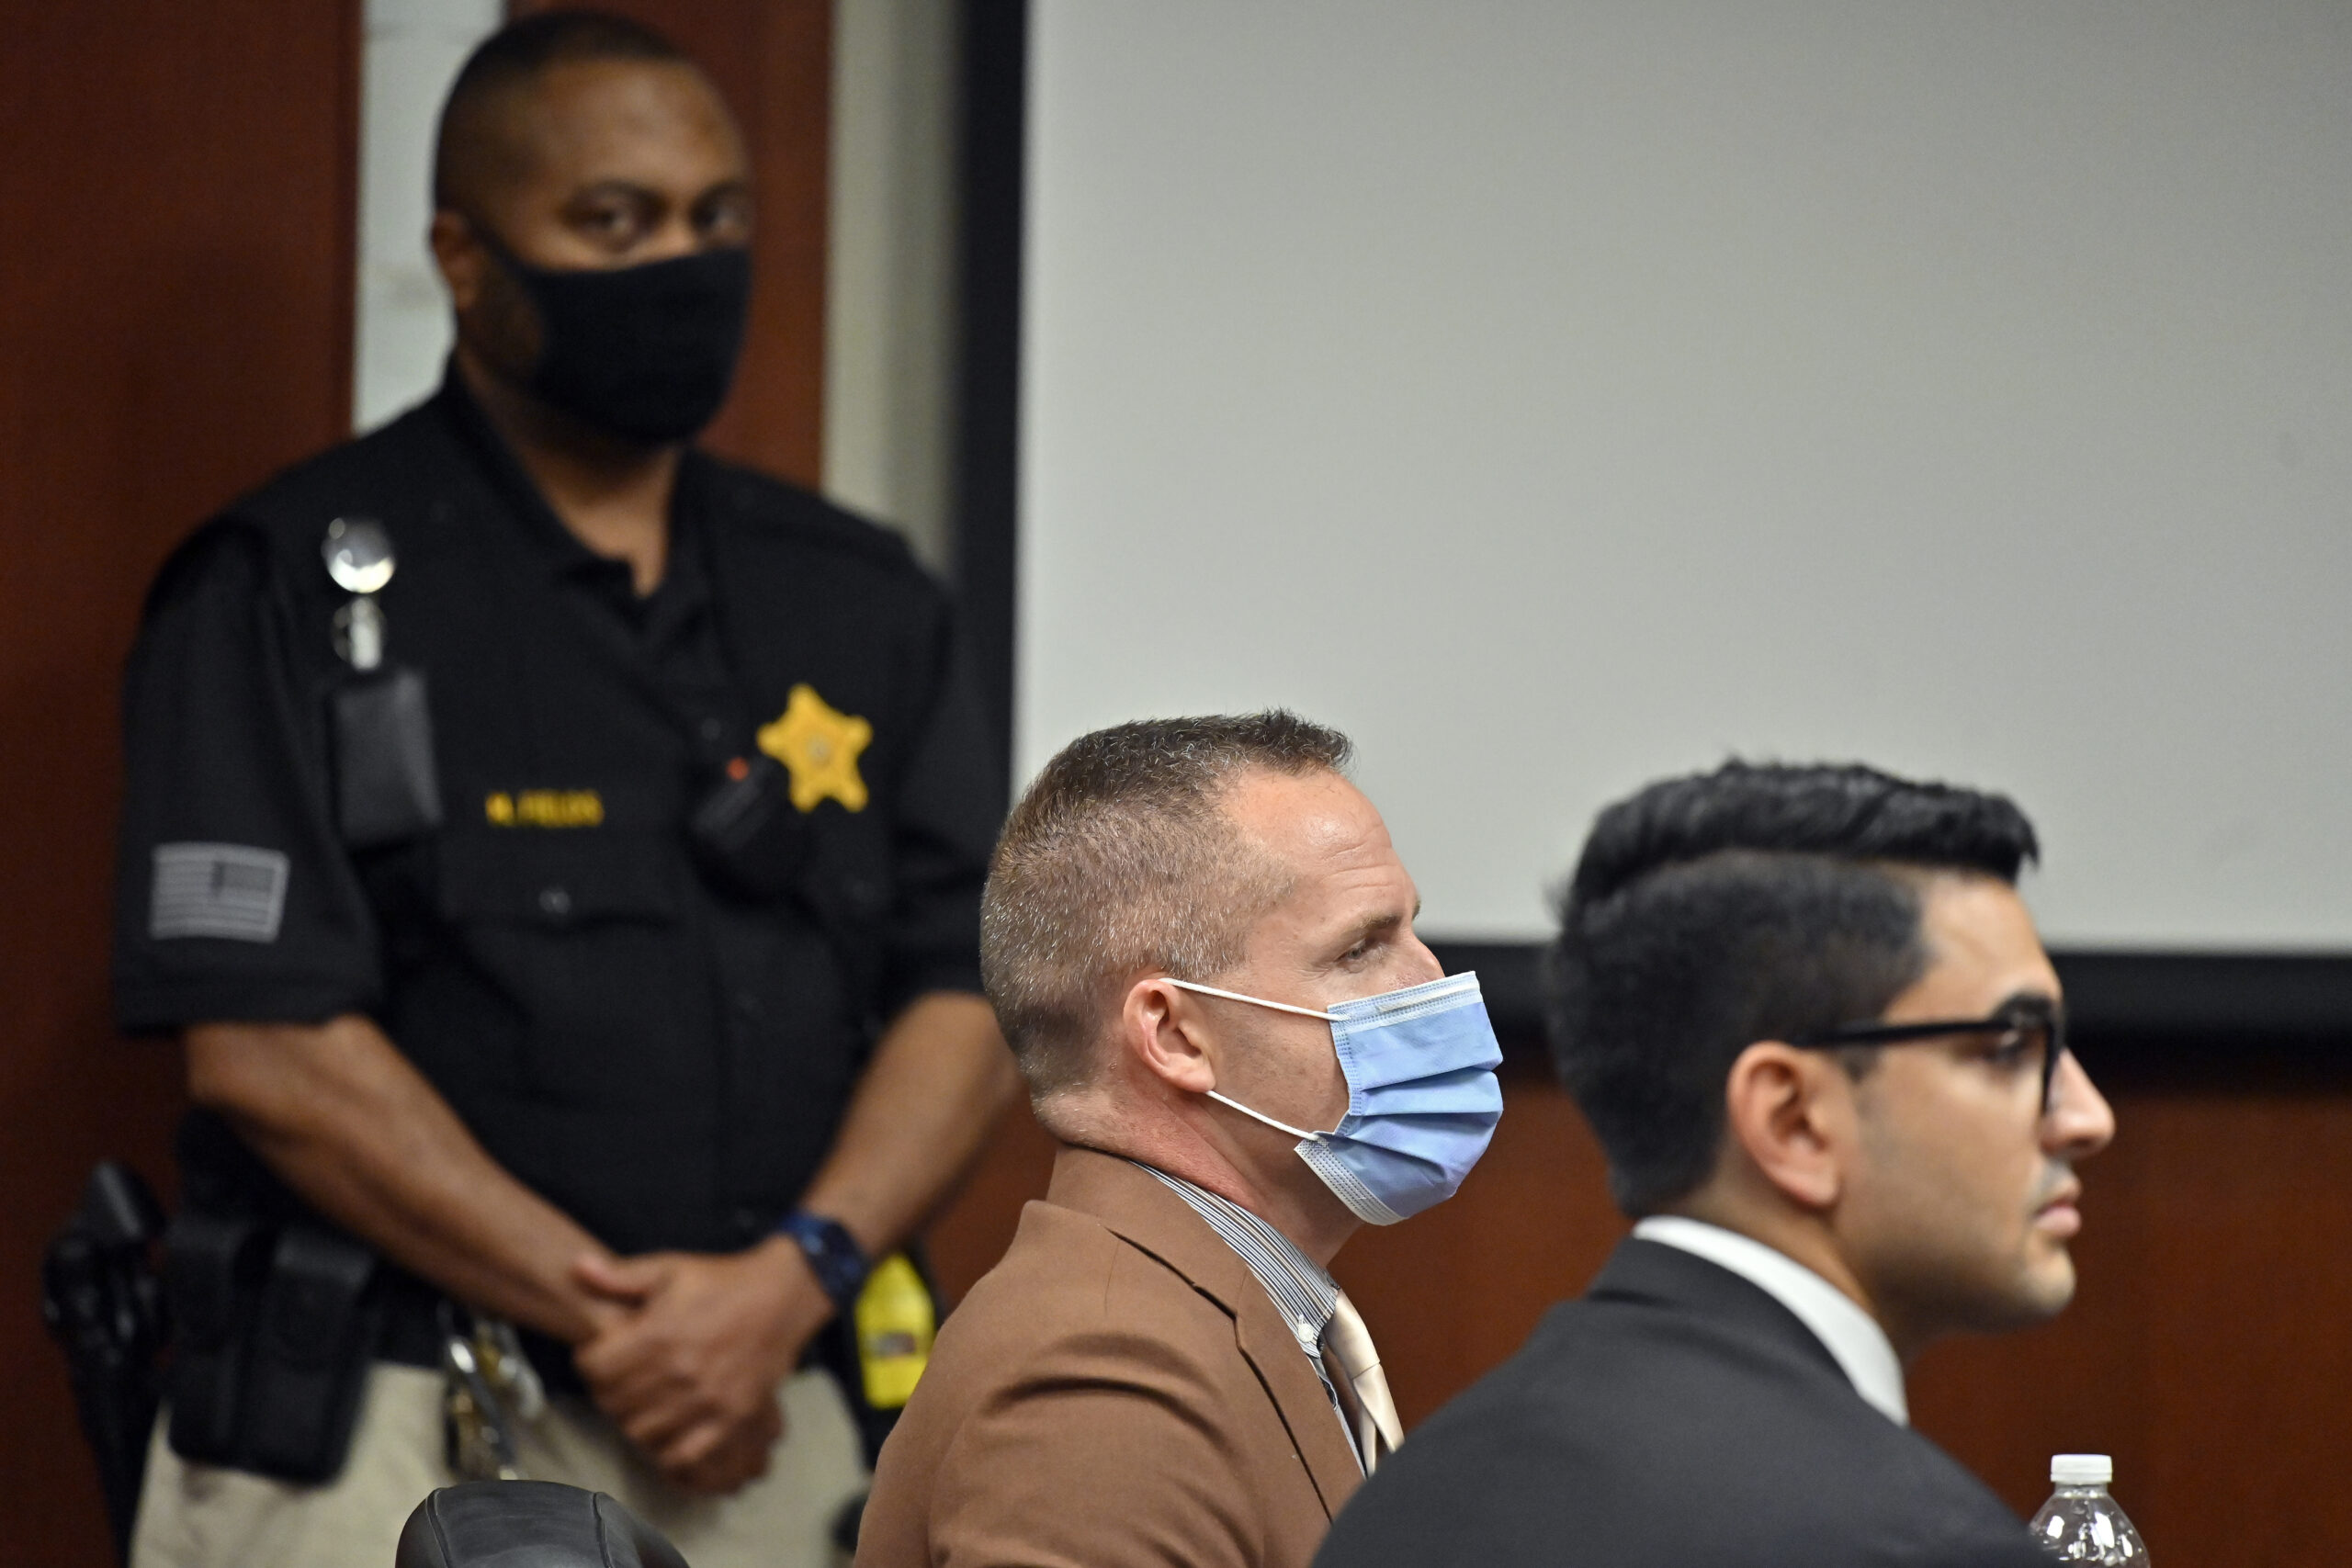 Former Louisville Police Officer Brett Hankison, center, awaits the jury's verdict in his wanton endangerment trial, Thursday, March 3, 2022, in Louisville, Ky. The jury cleared Hankison of charges that he endangered neighbors when he fired shots into an apartment during the 2020 drug raid that ended with Breonna Taylor’s death. (AP Photo/Timothy D. Easley, Pool)